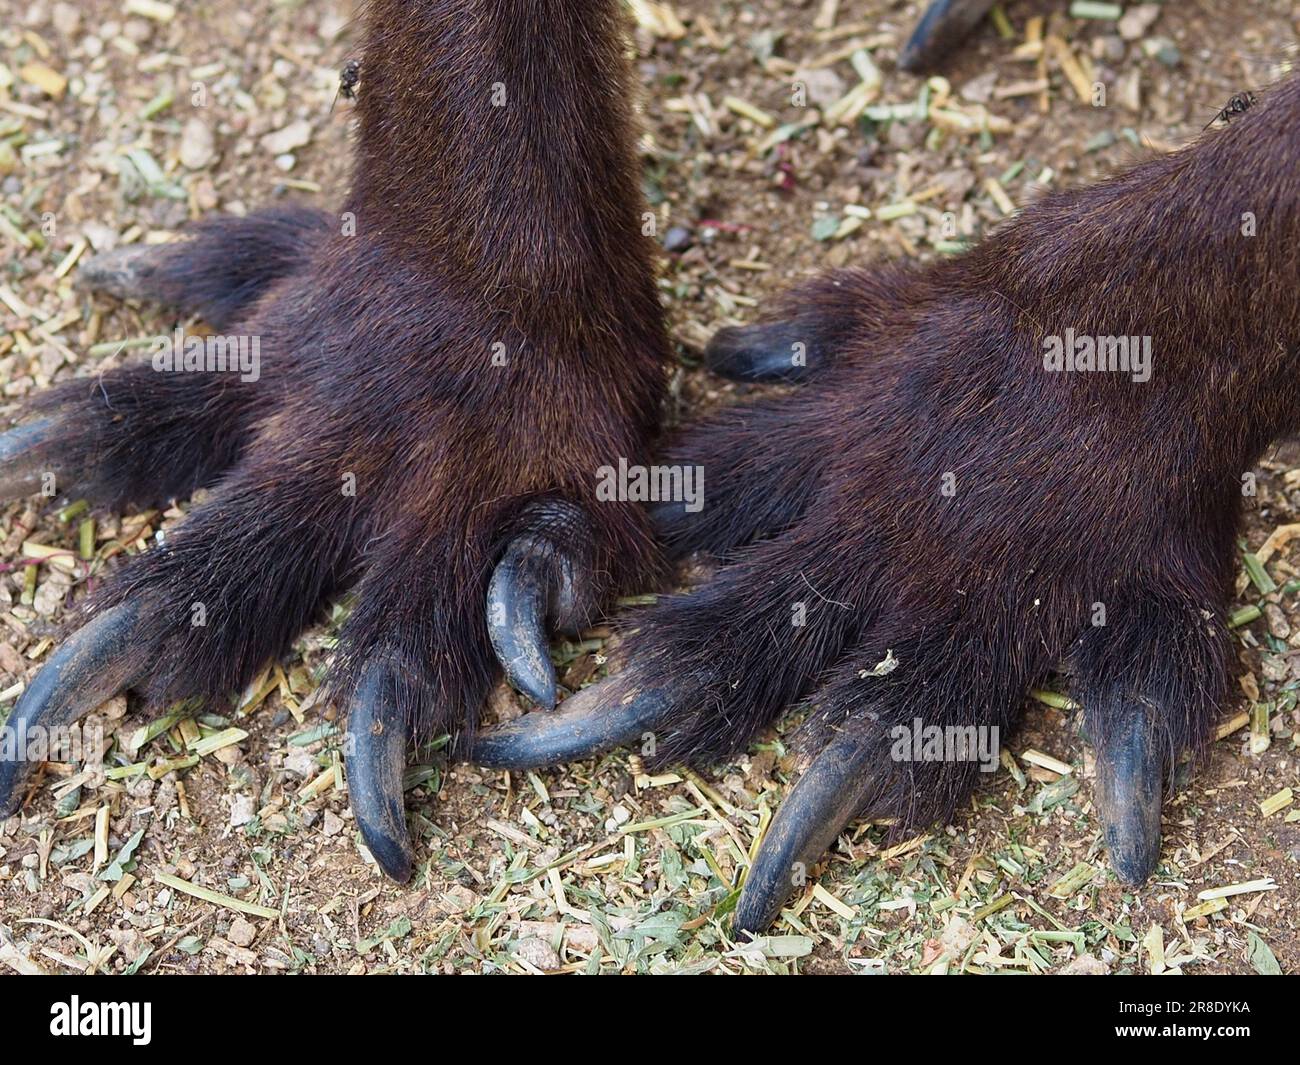 A closeup image of a Kangaroo Island Kangaroo's unique front paws with powerful sharp-edged claws. Stock Photo